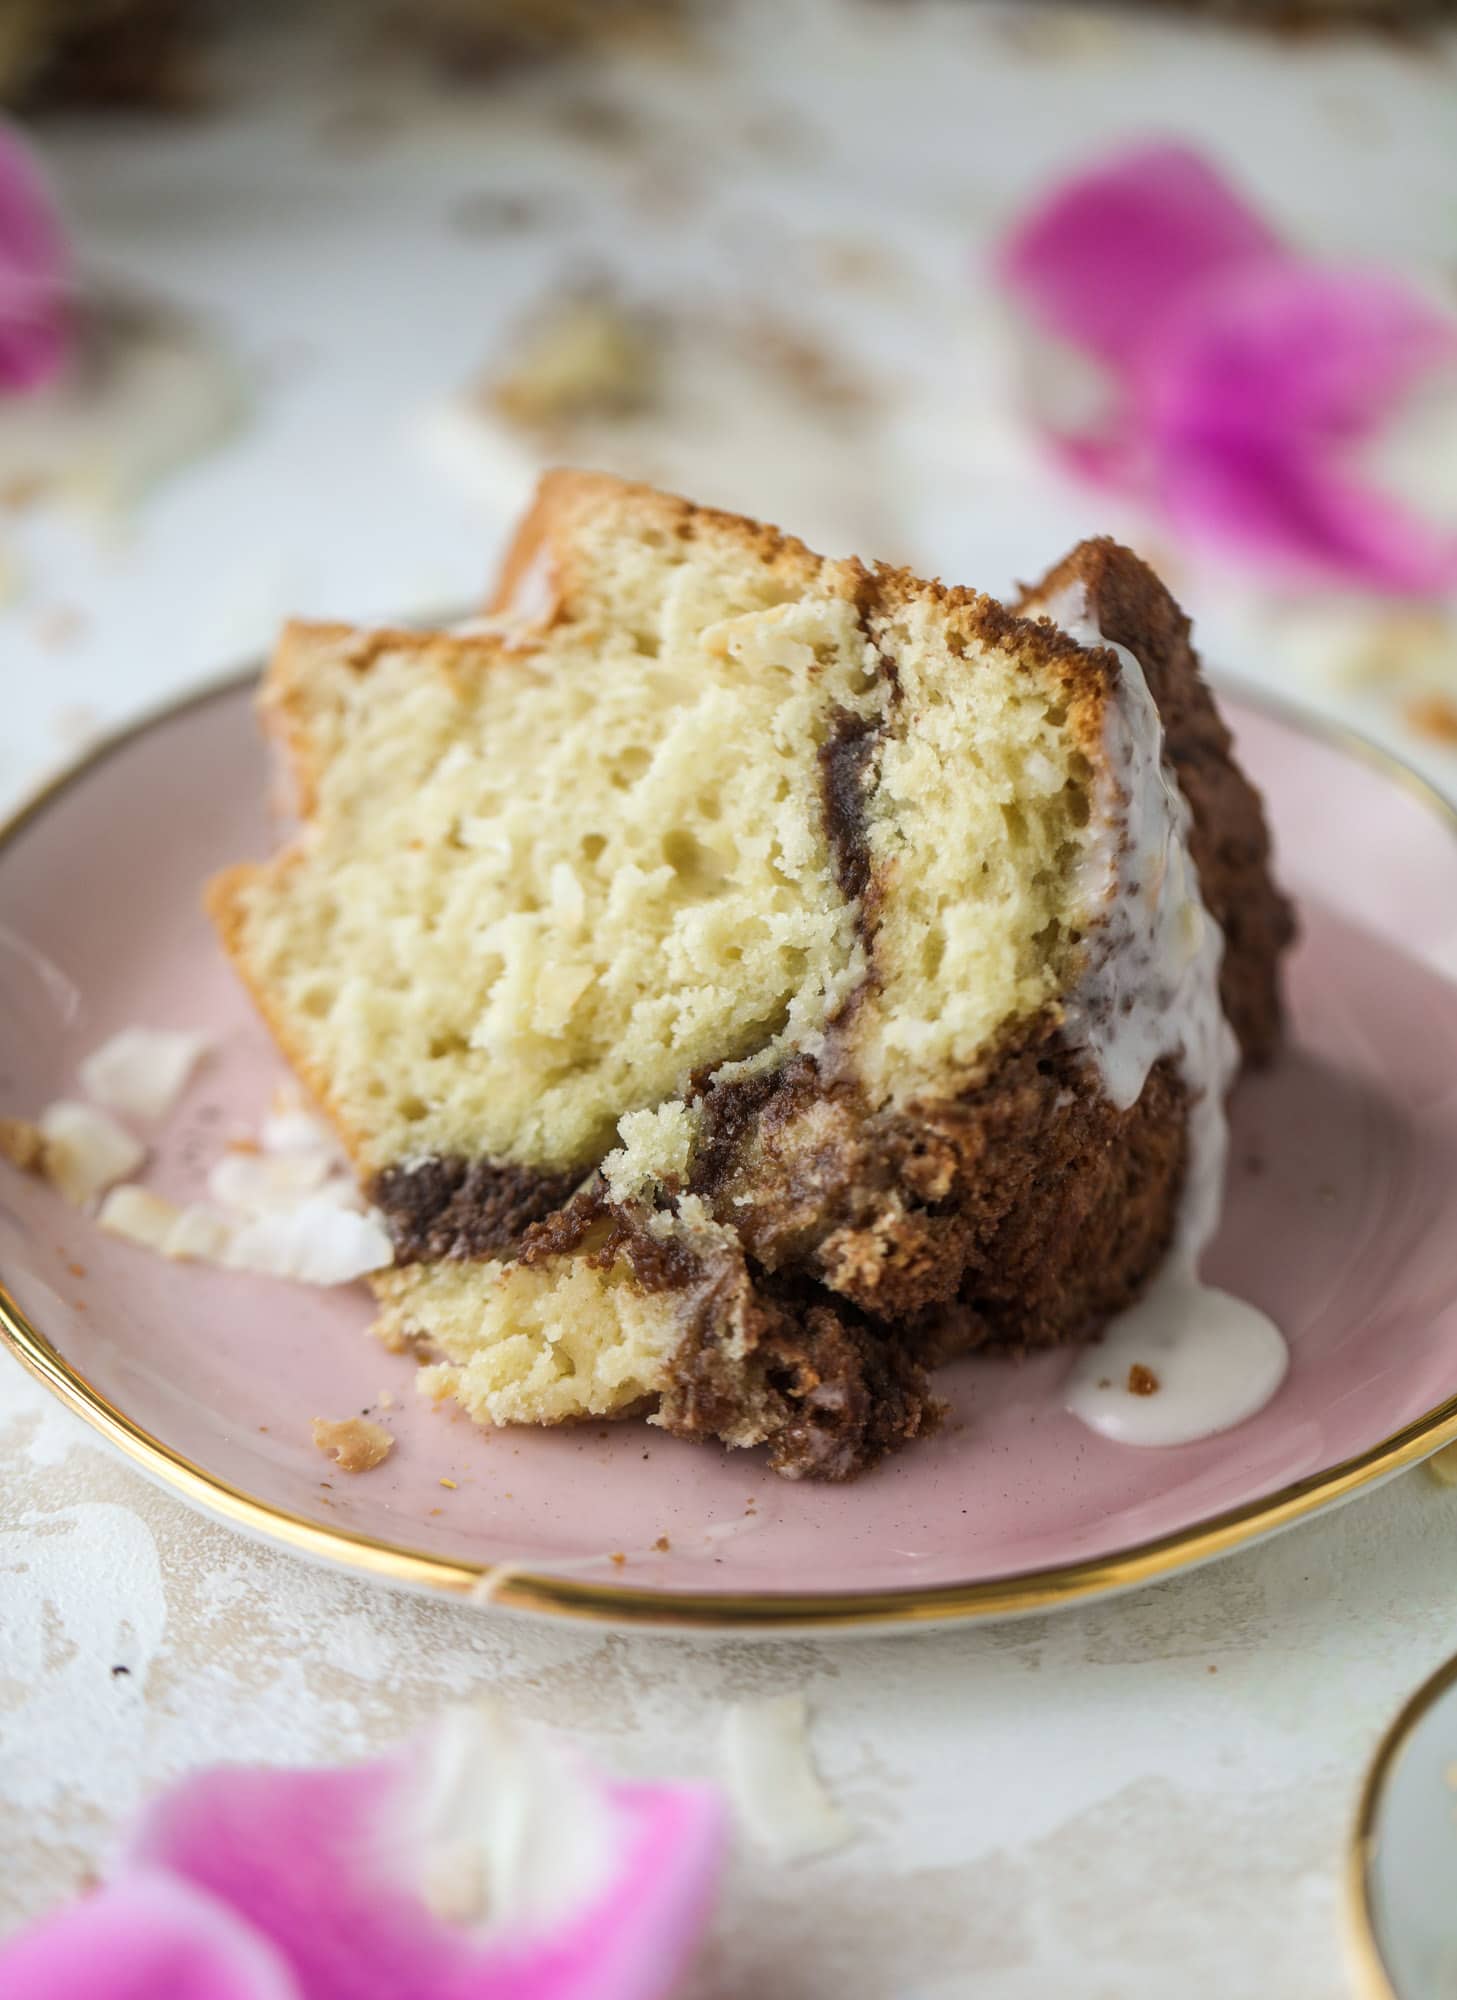 Make breakfast and brunch better with coconut coffee cake! Tender coconut cake with a cocoa sugar streusel and a coconut glaze. To die for!